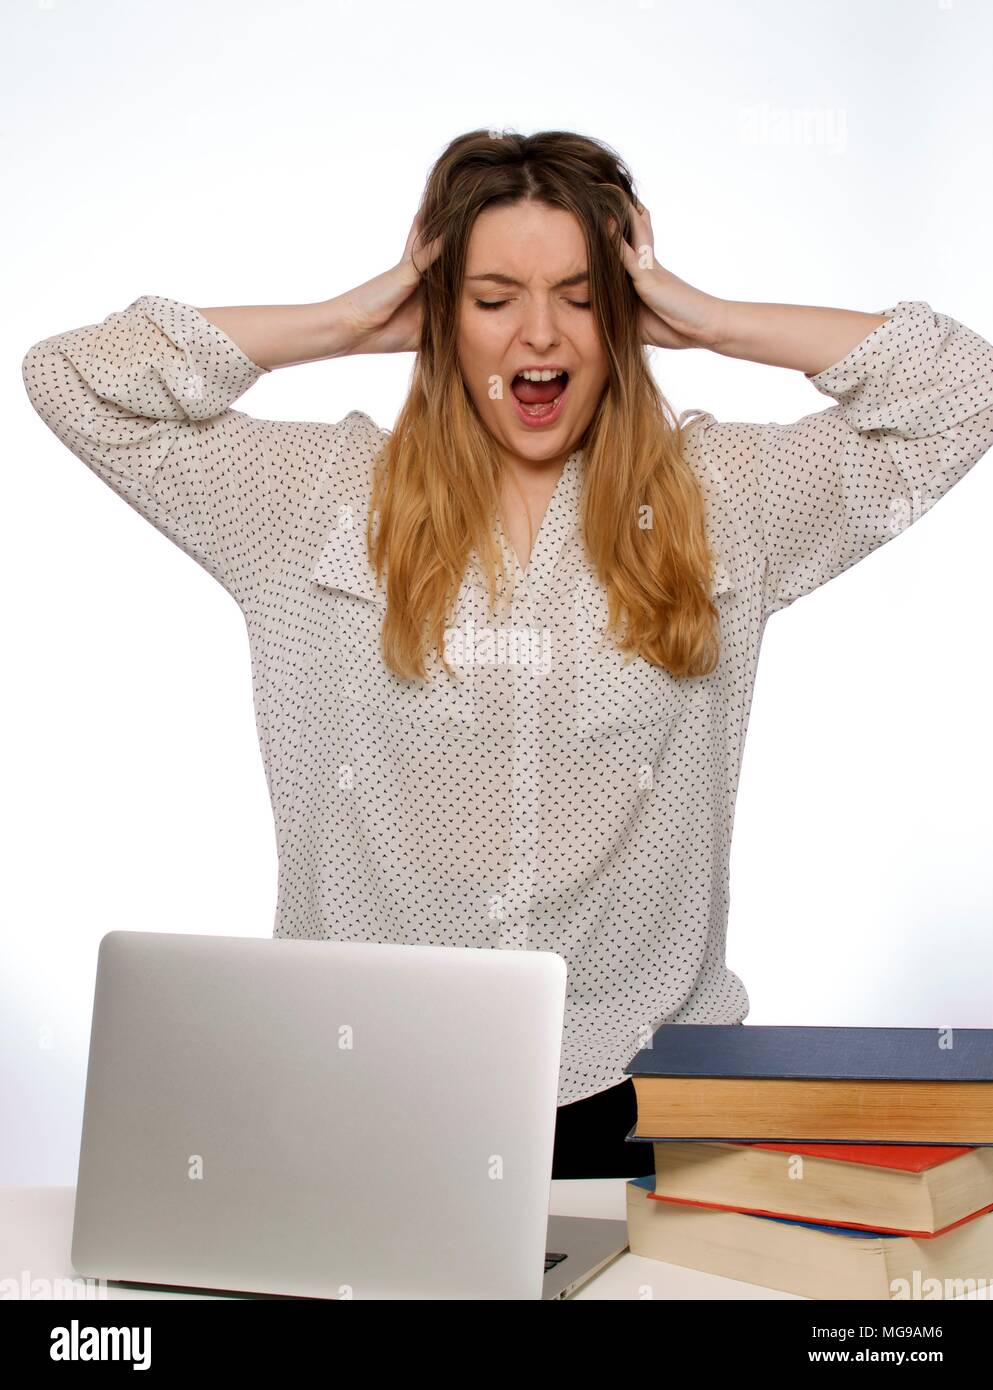 Young woman with hands in hair and laptop. Stock Photo